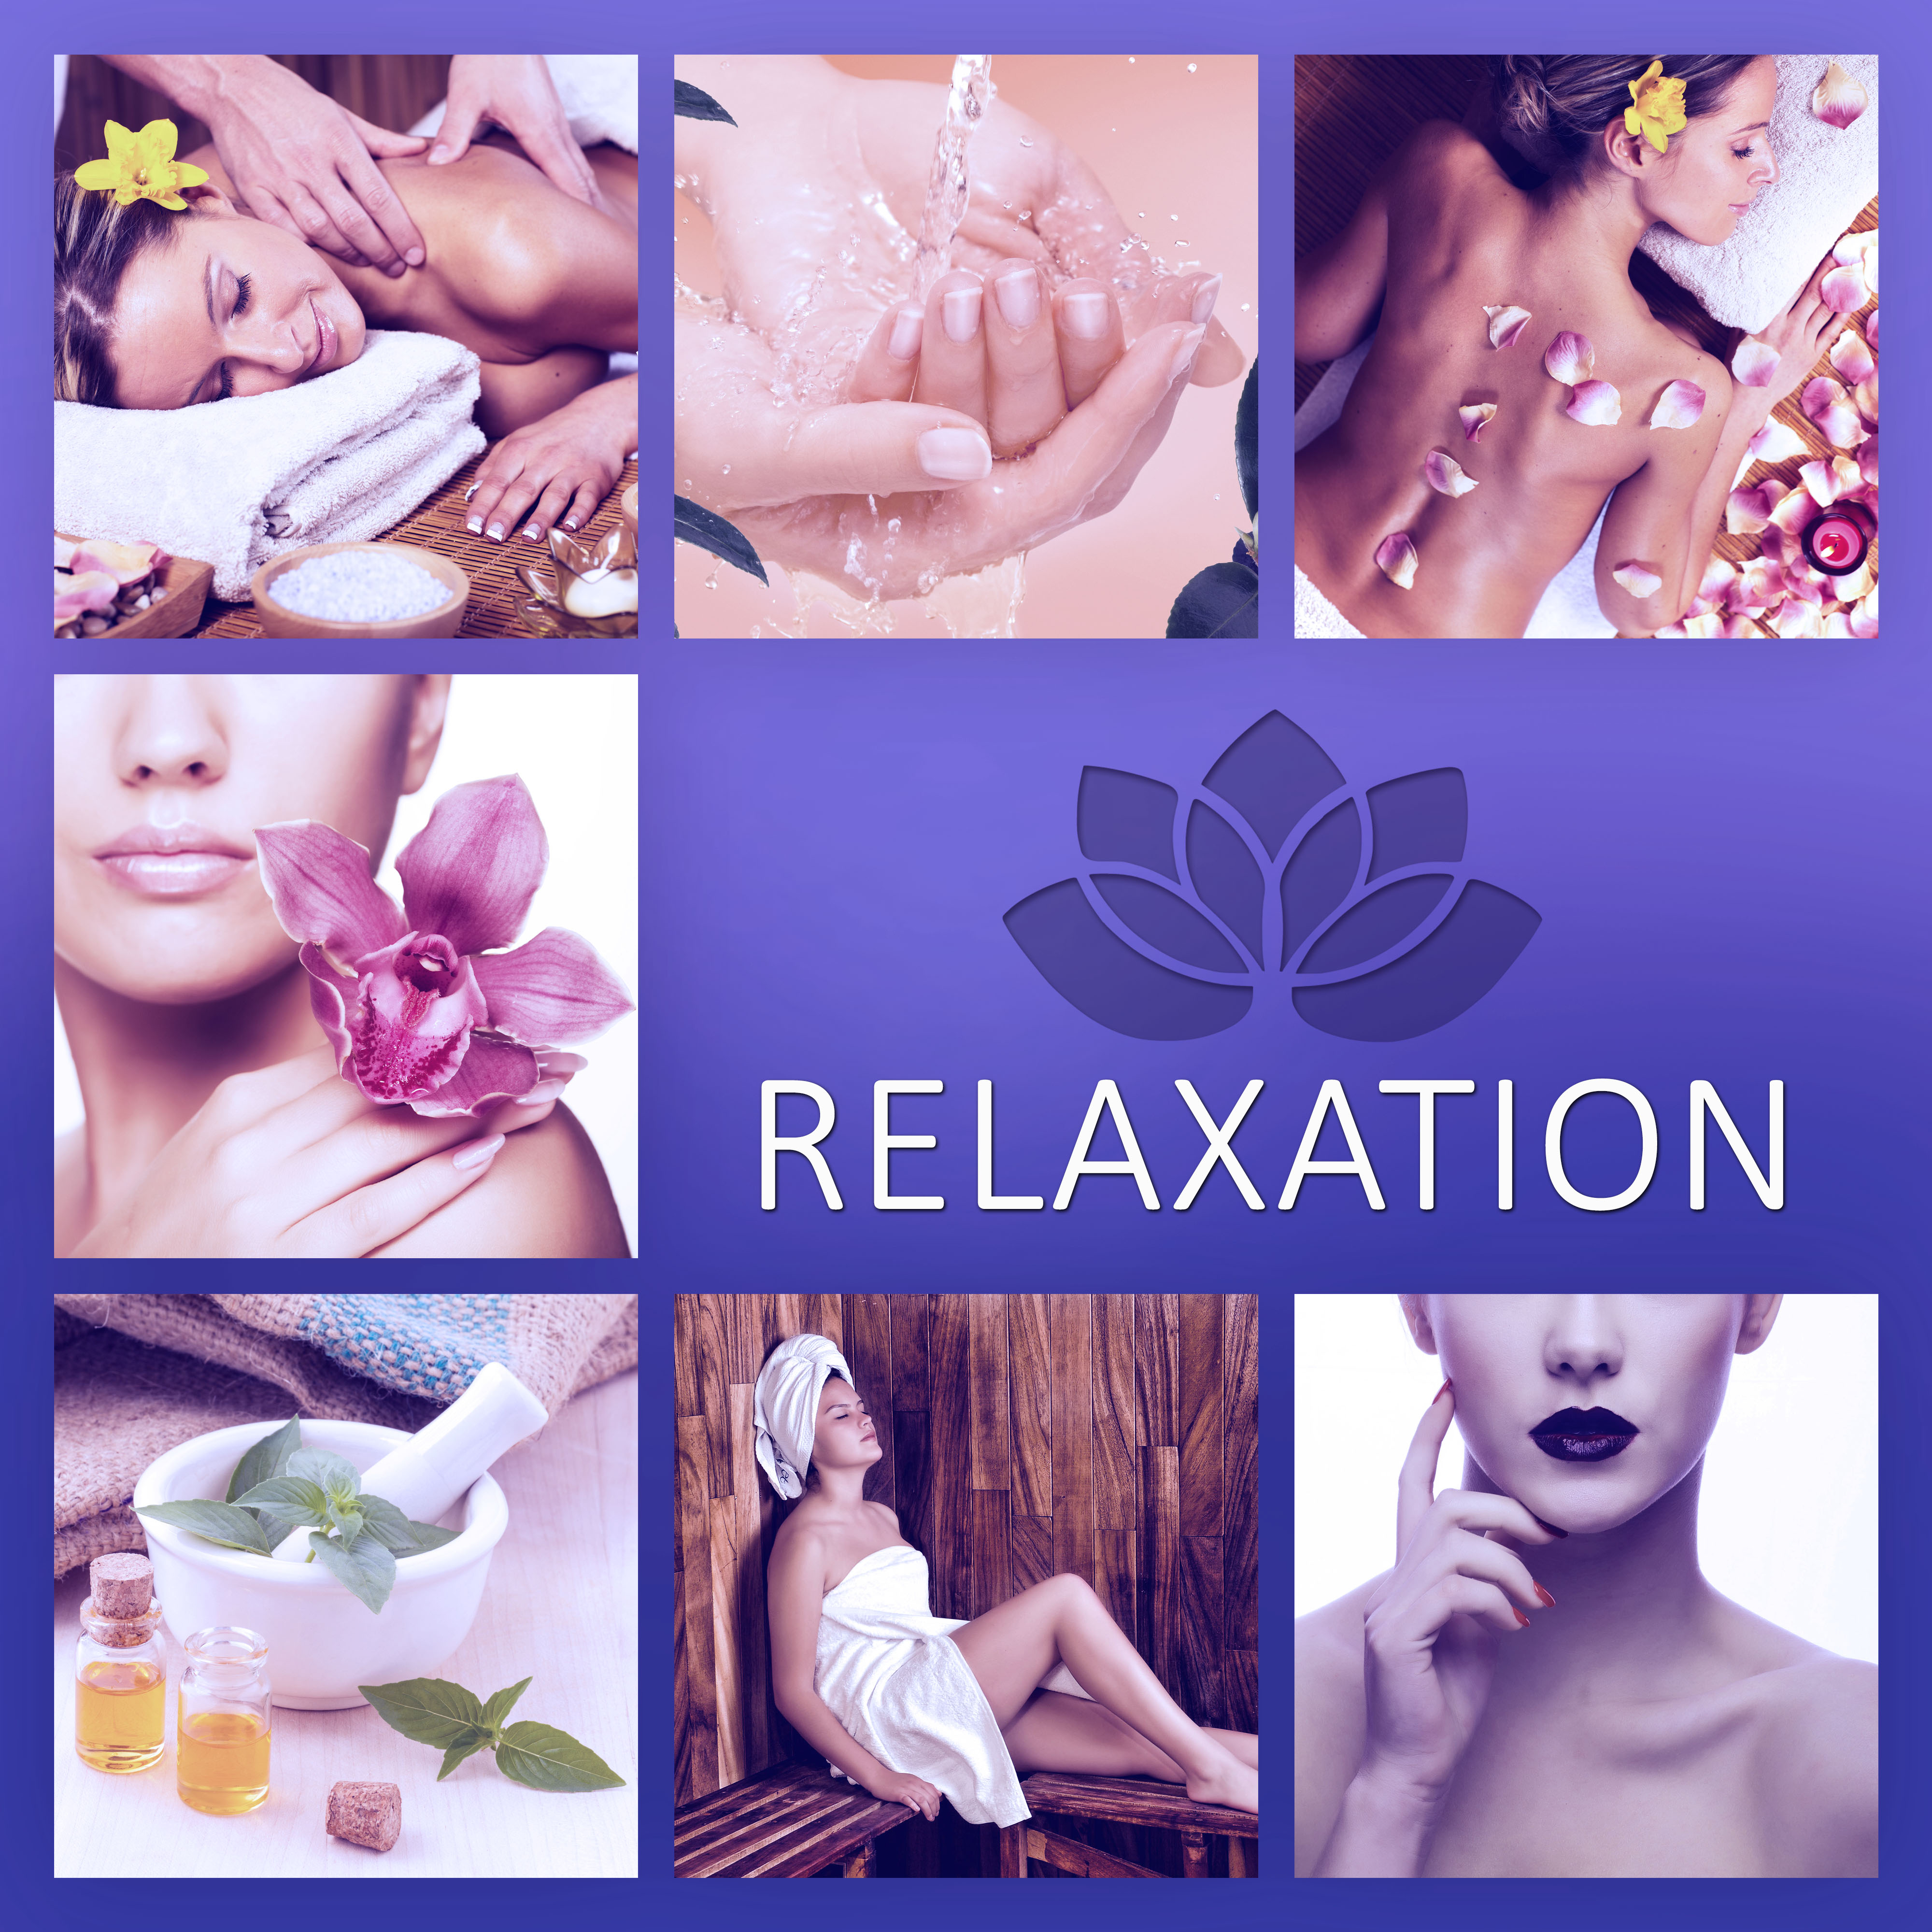 Relaxation  Nature Sounds, Spa Music for Massage, Deep Relaxing Massage, Reiki, Zen, Meditation, Healing Therapy